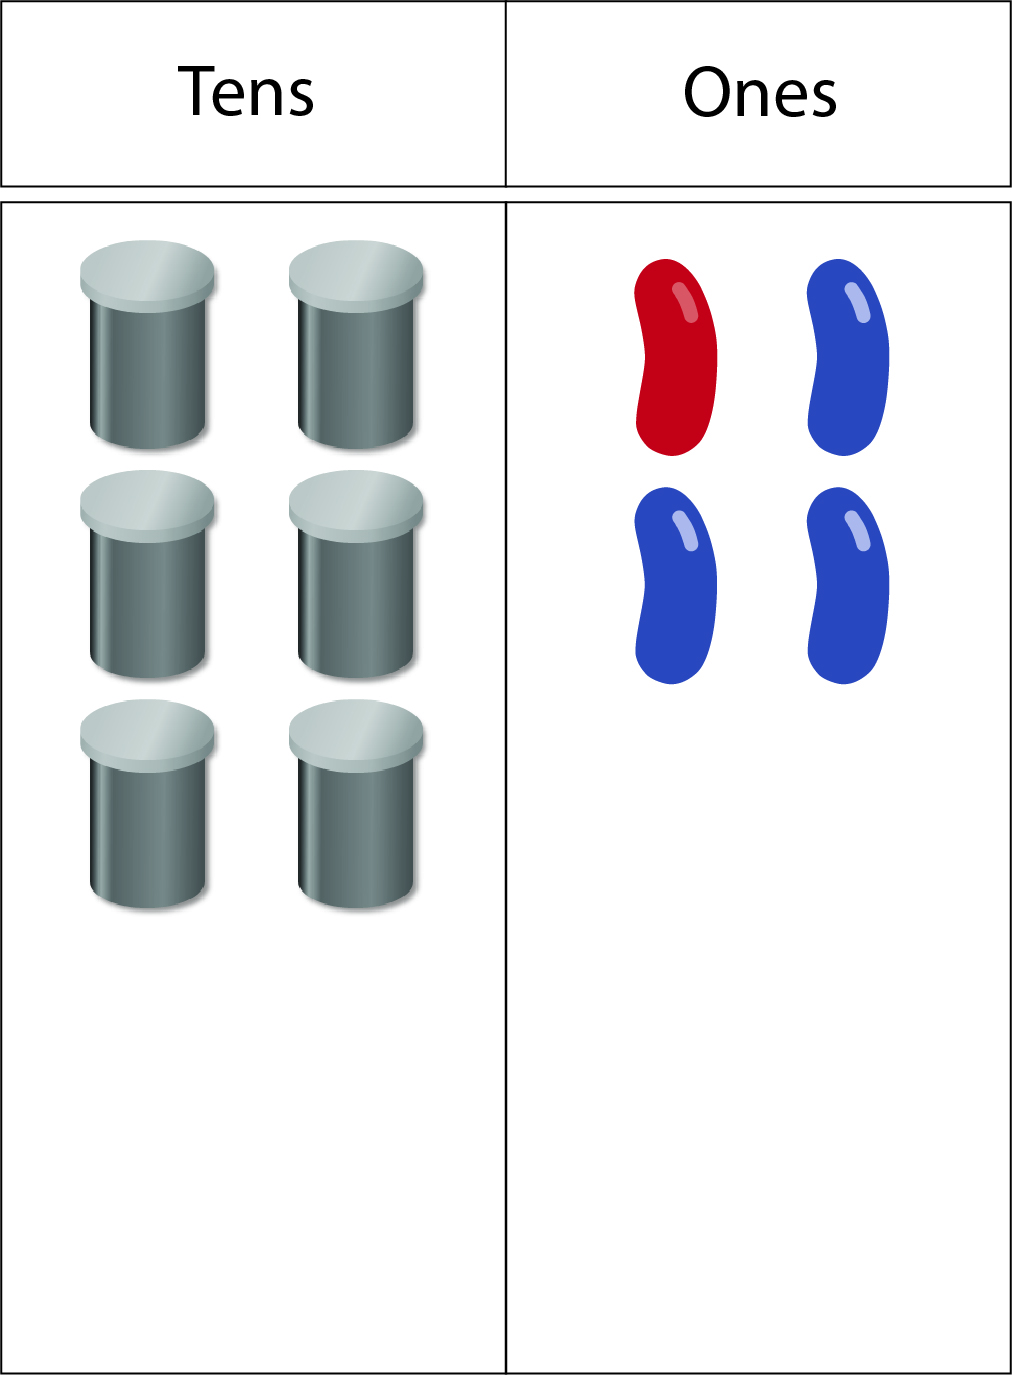 Image of a two-column (tens and ones) place value board displaying six ten-bean canisters in the tens column, and 4 individual beans in the ones column.